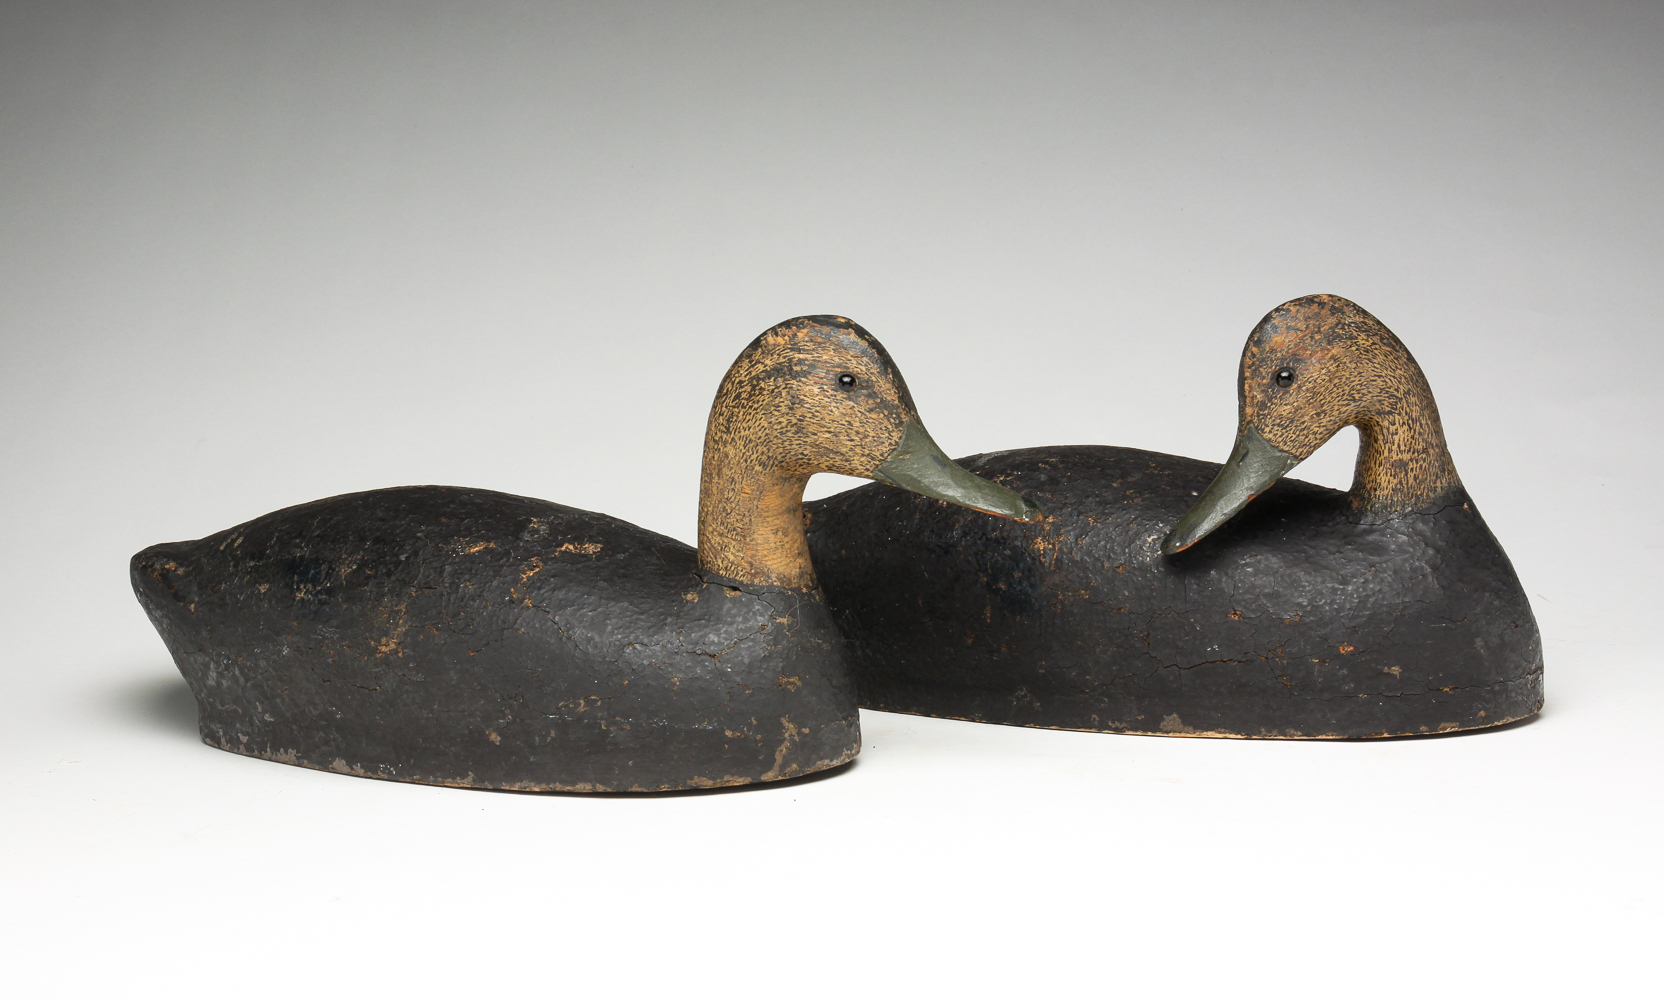 A PAIR OF AMERICAN DUCK DECOYS. First